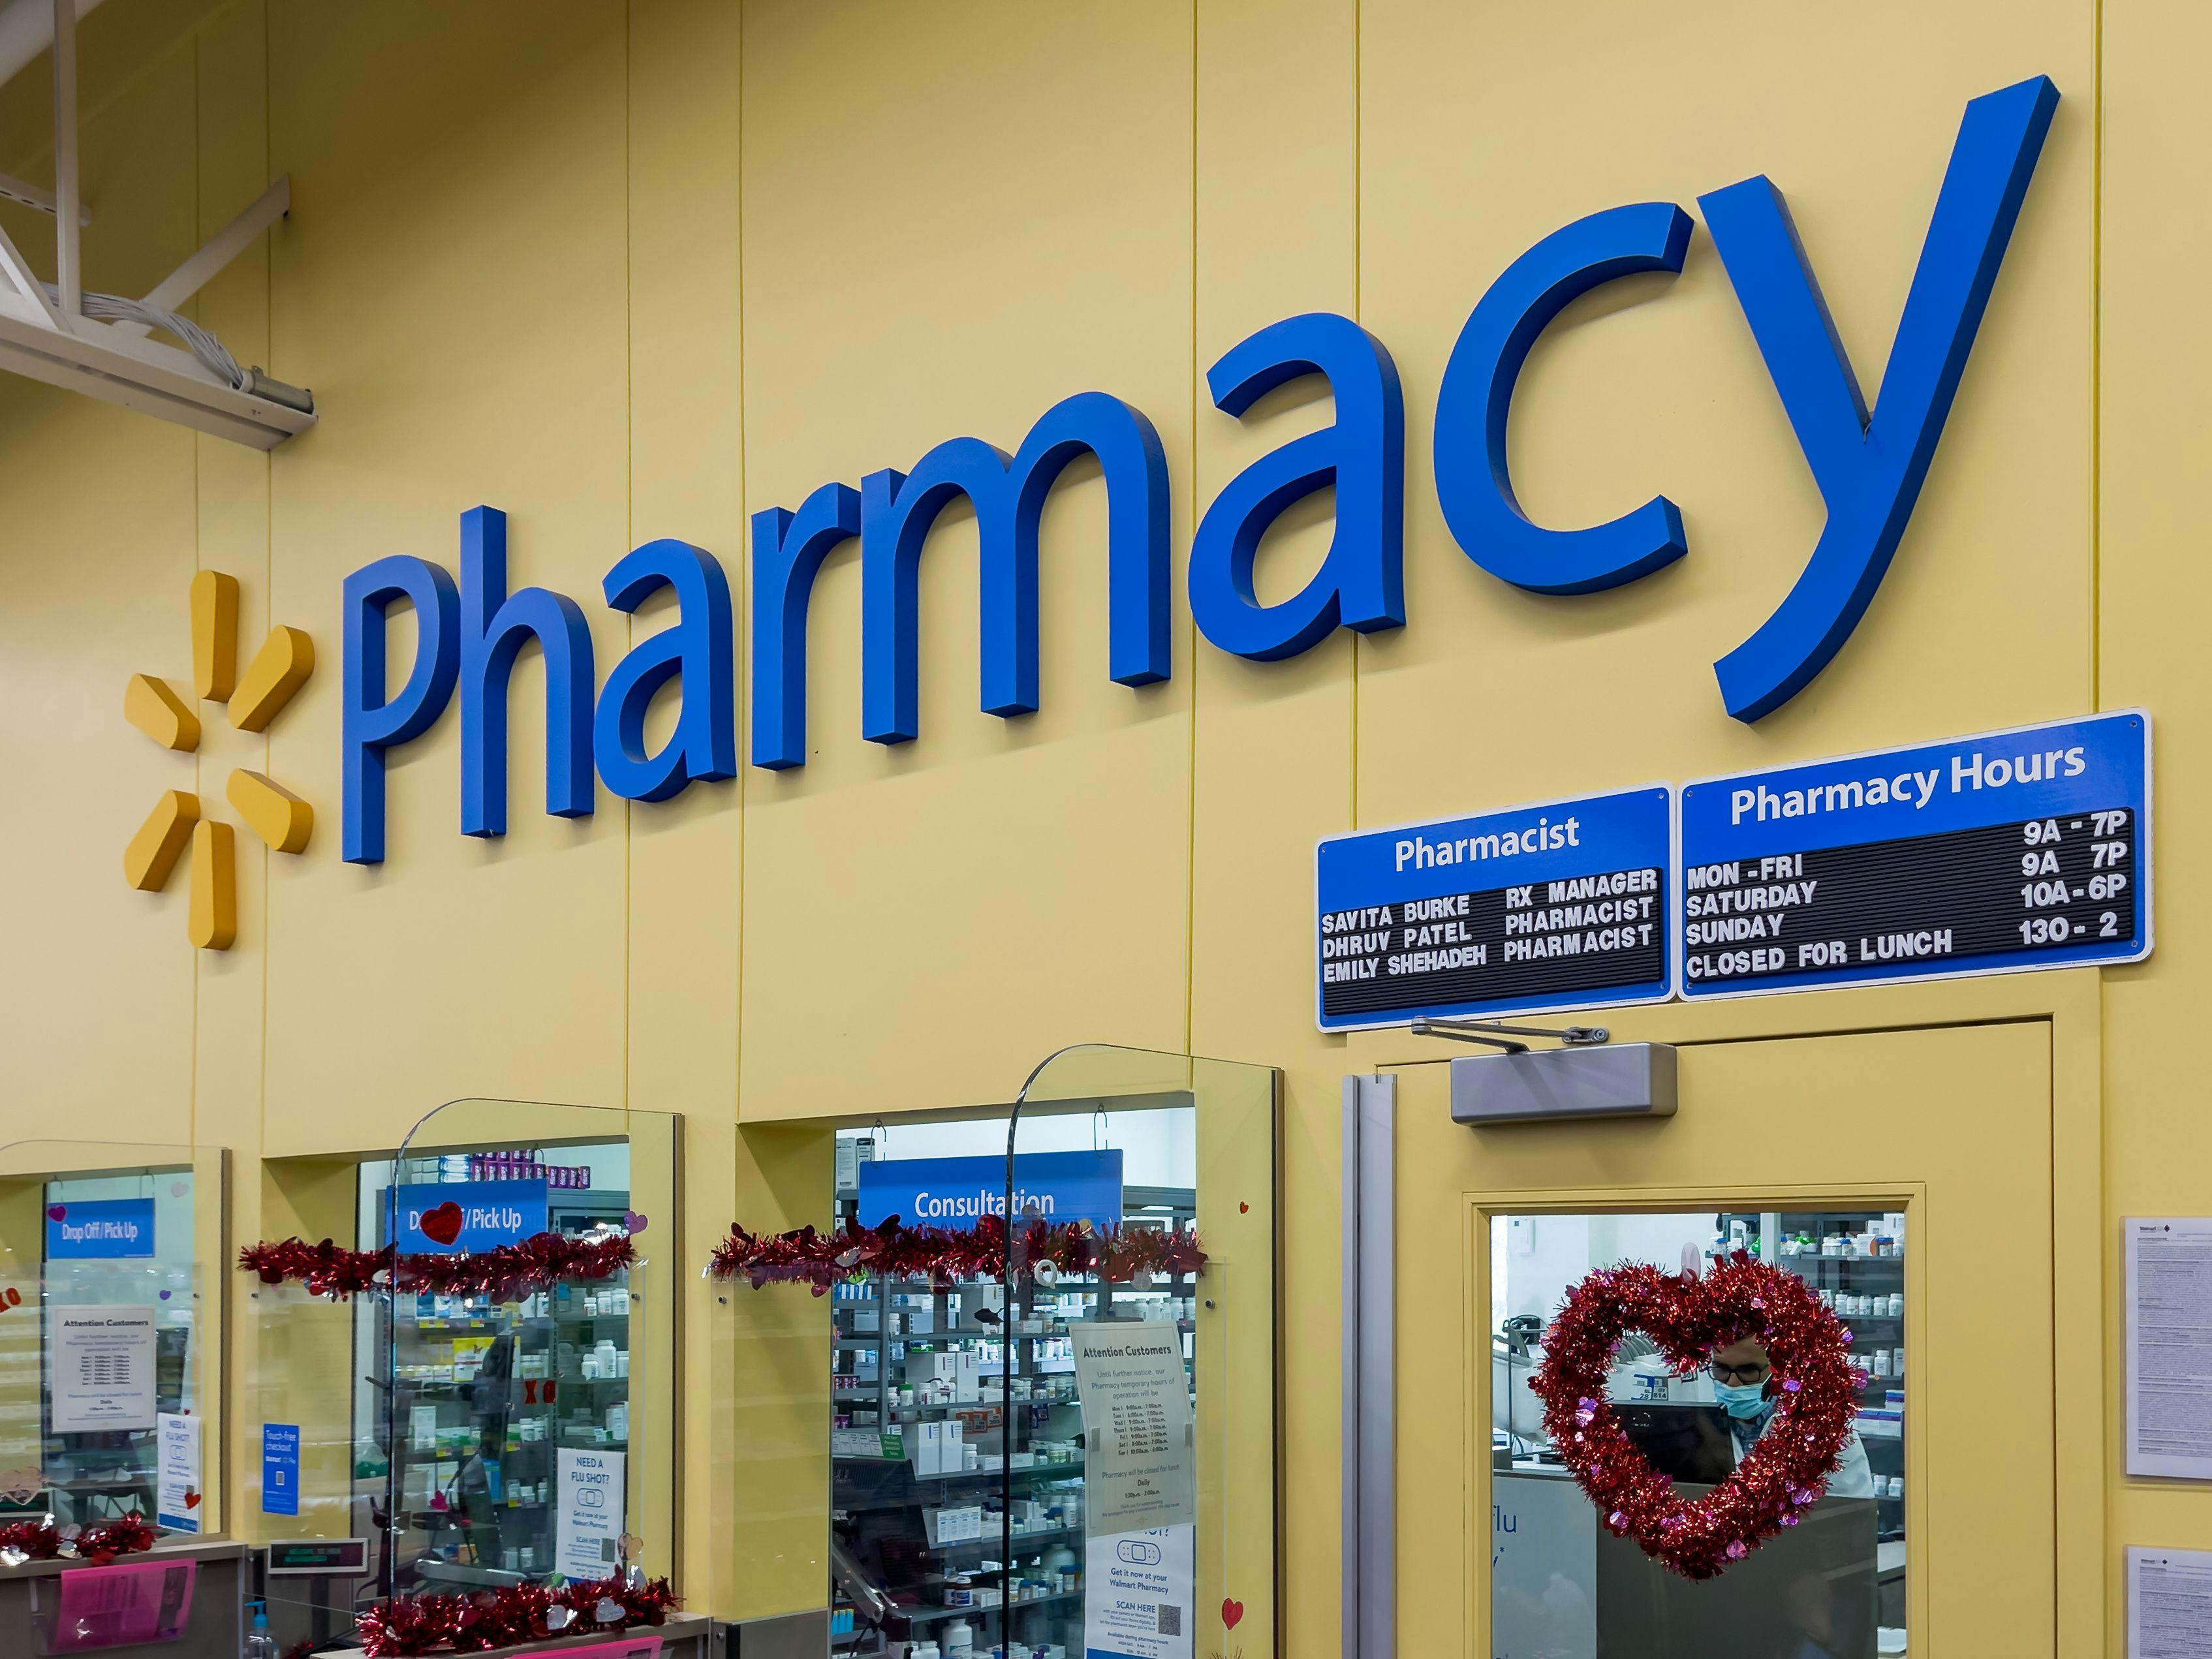 Walmart Expanding Their Efforts to Care for HIV Community